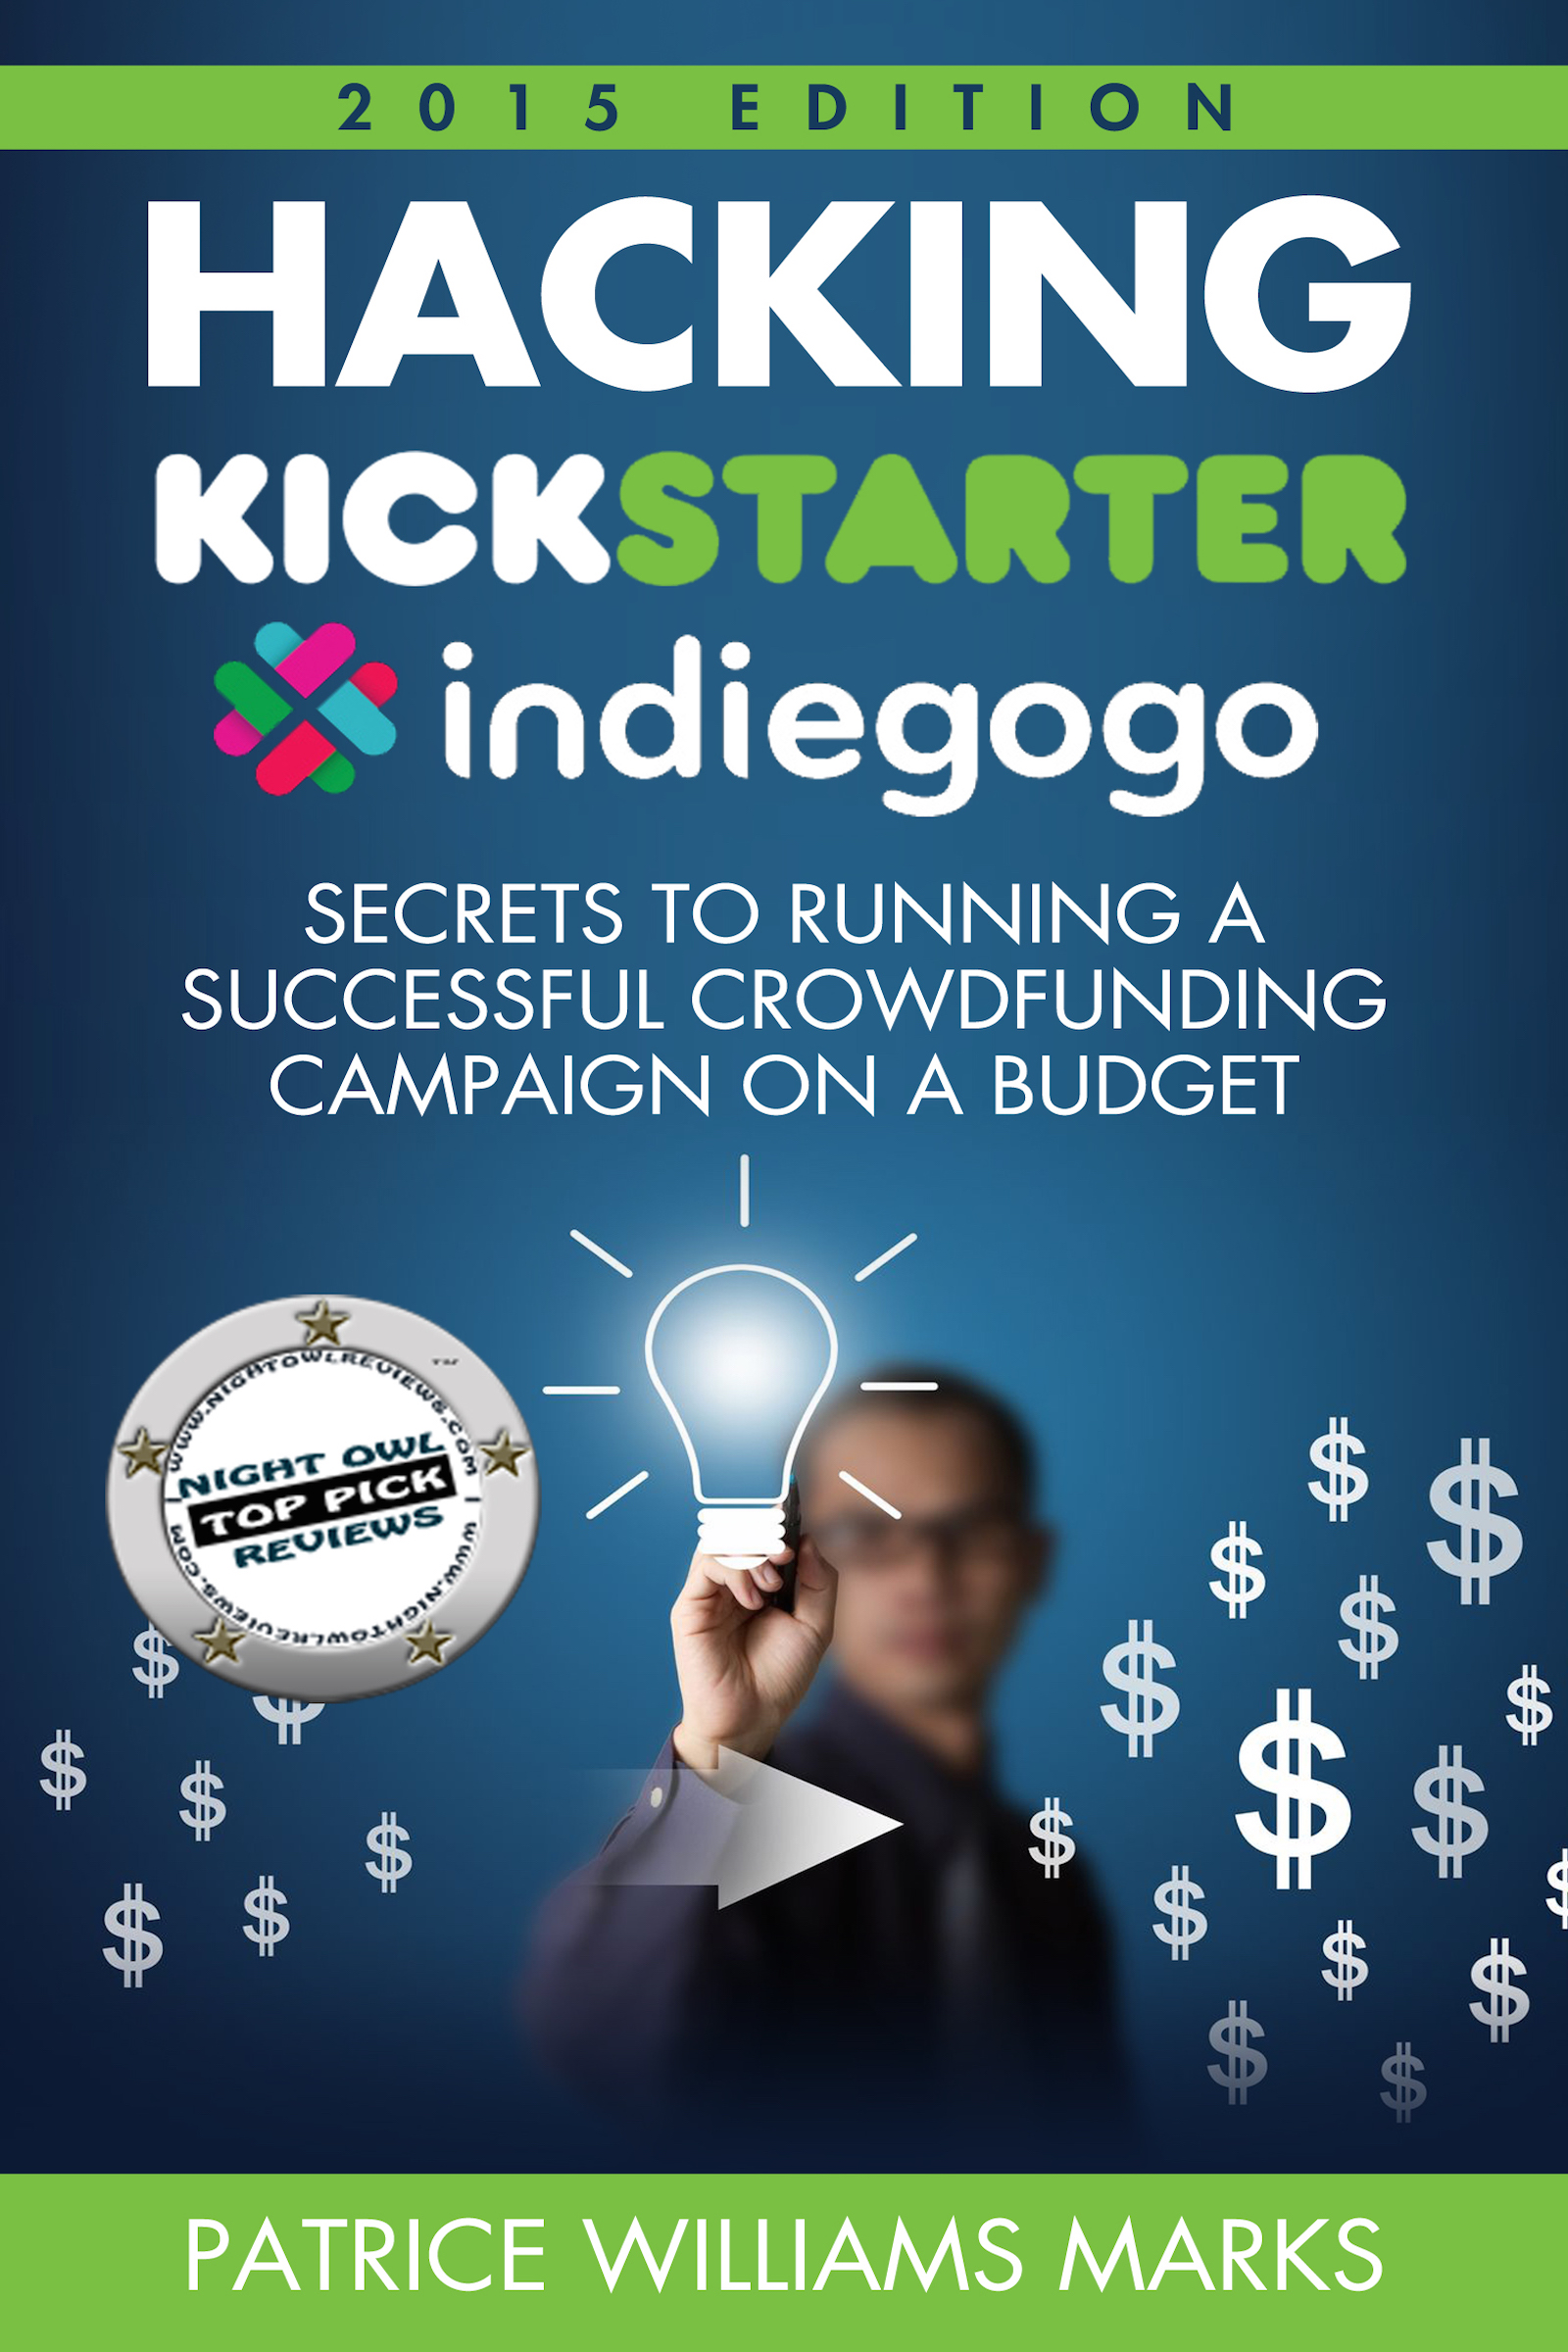 Hacking Kickstarter, Indiegogo: How to Raise Big Bucks in 30 Days (Secrets to Running a Successful Crowd Funding Campaign on a Budget)